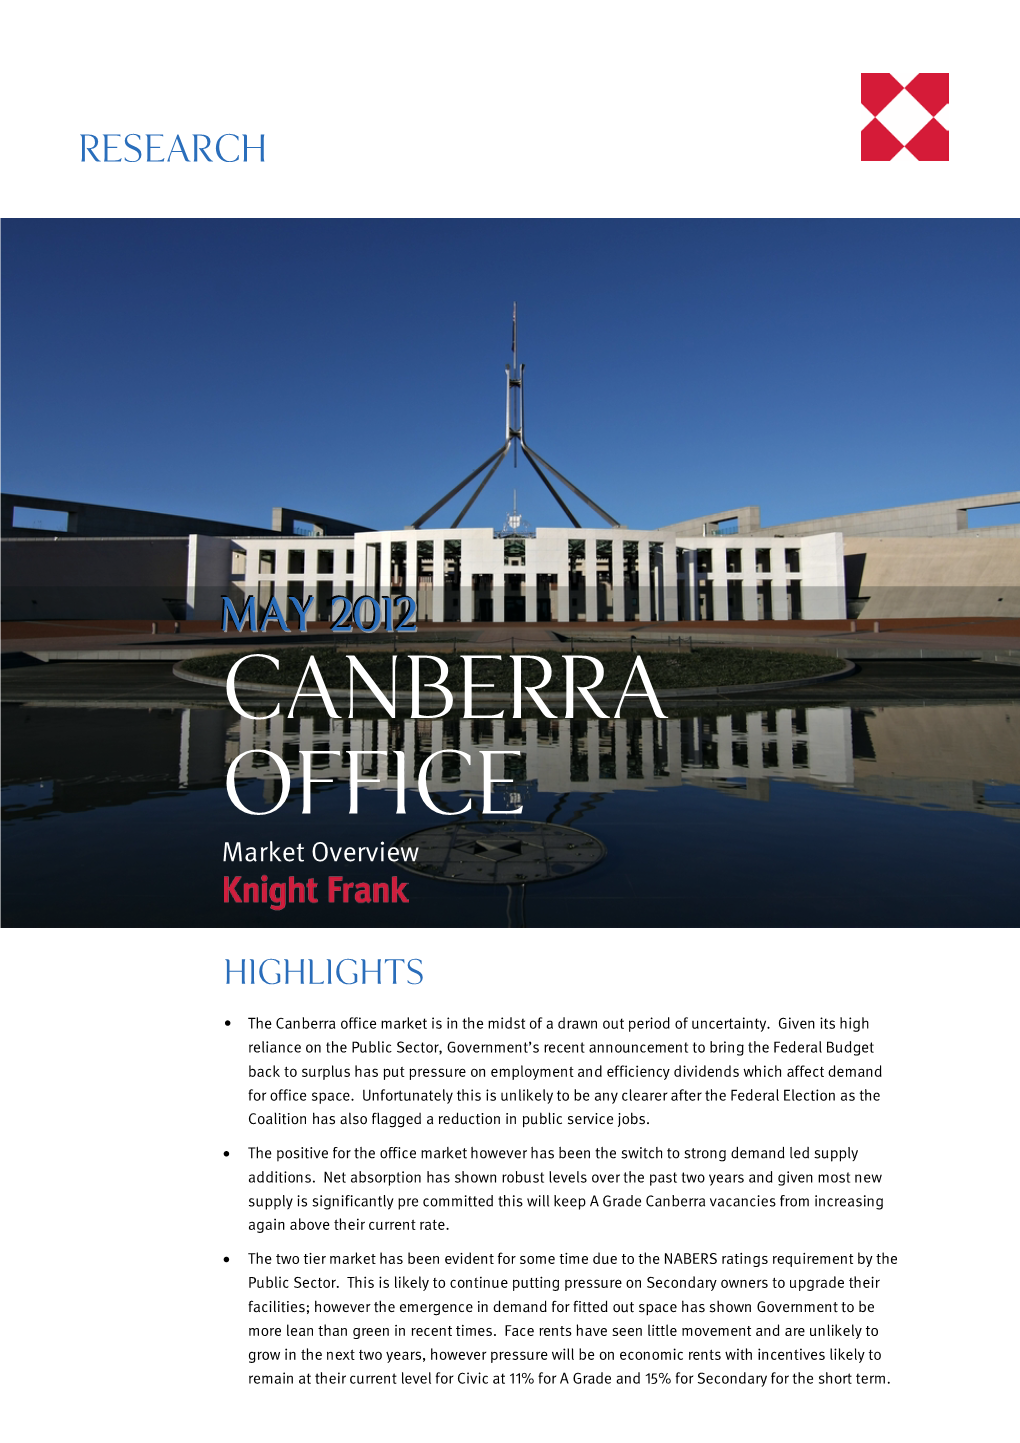 CANBERRA OFFICE Market Overview